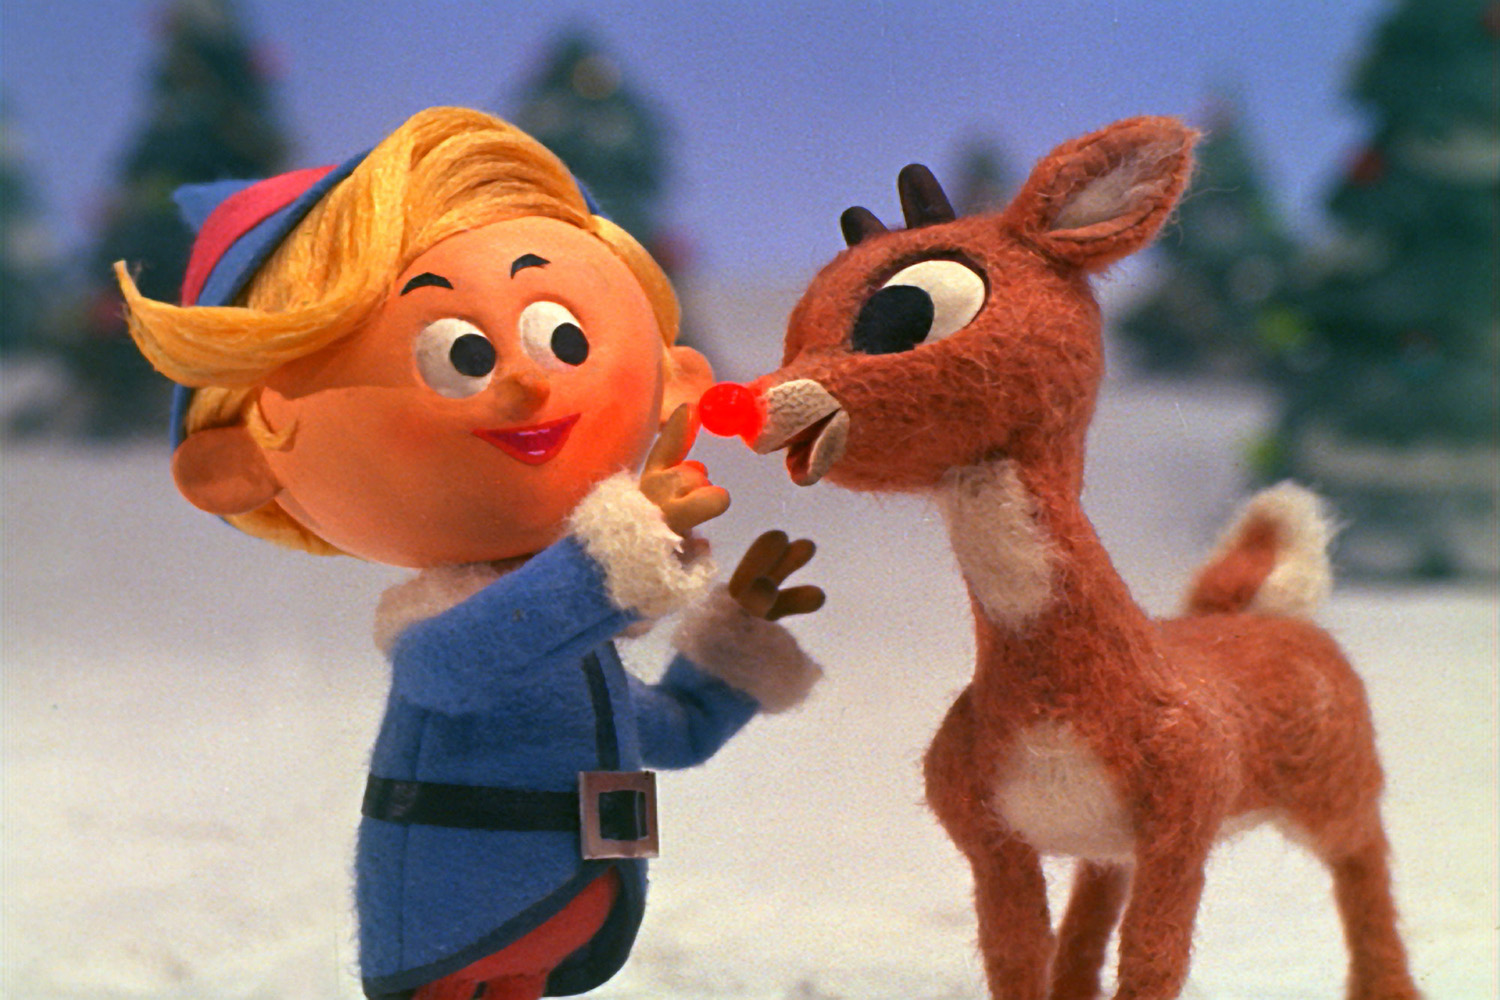 Image #: 904522 "Rudolph the Red-Nosed Reindeer," the longest-running holiday special in television history, celebrates its 40th anniversary broadcast on Wednesday, December 1, 2004. CBS /Landov